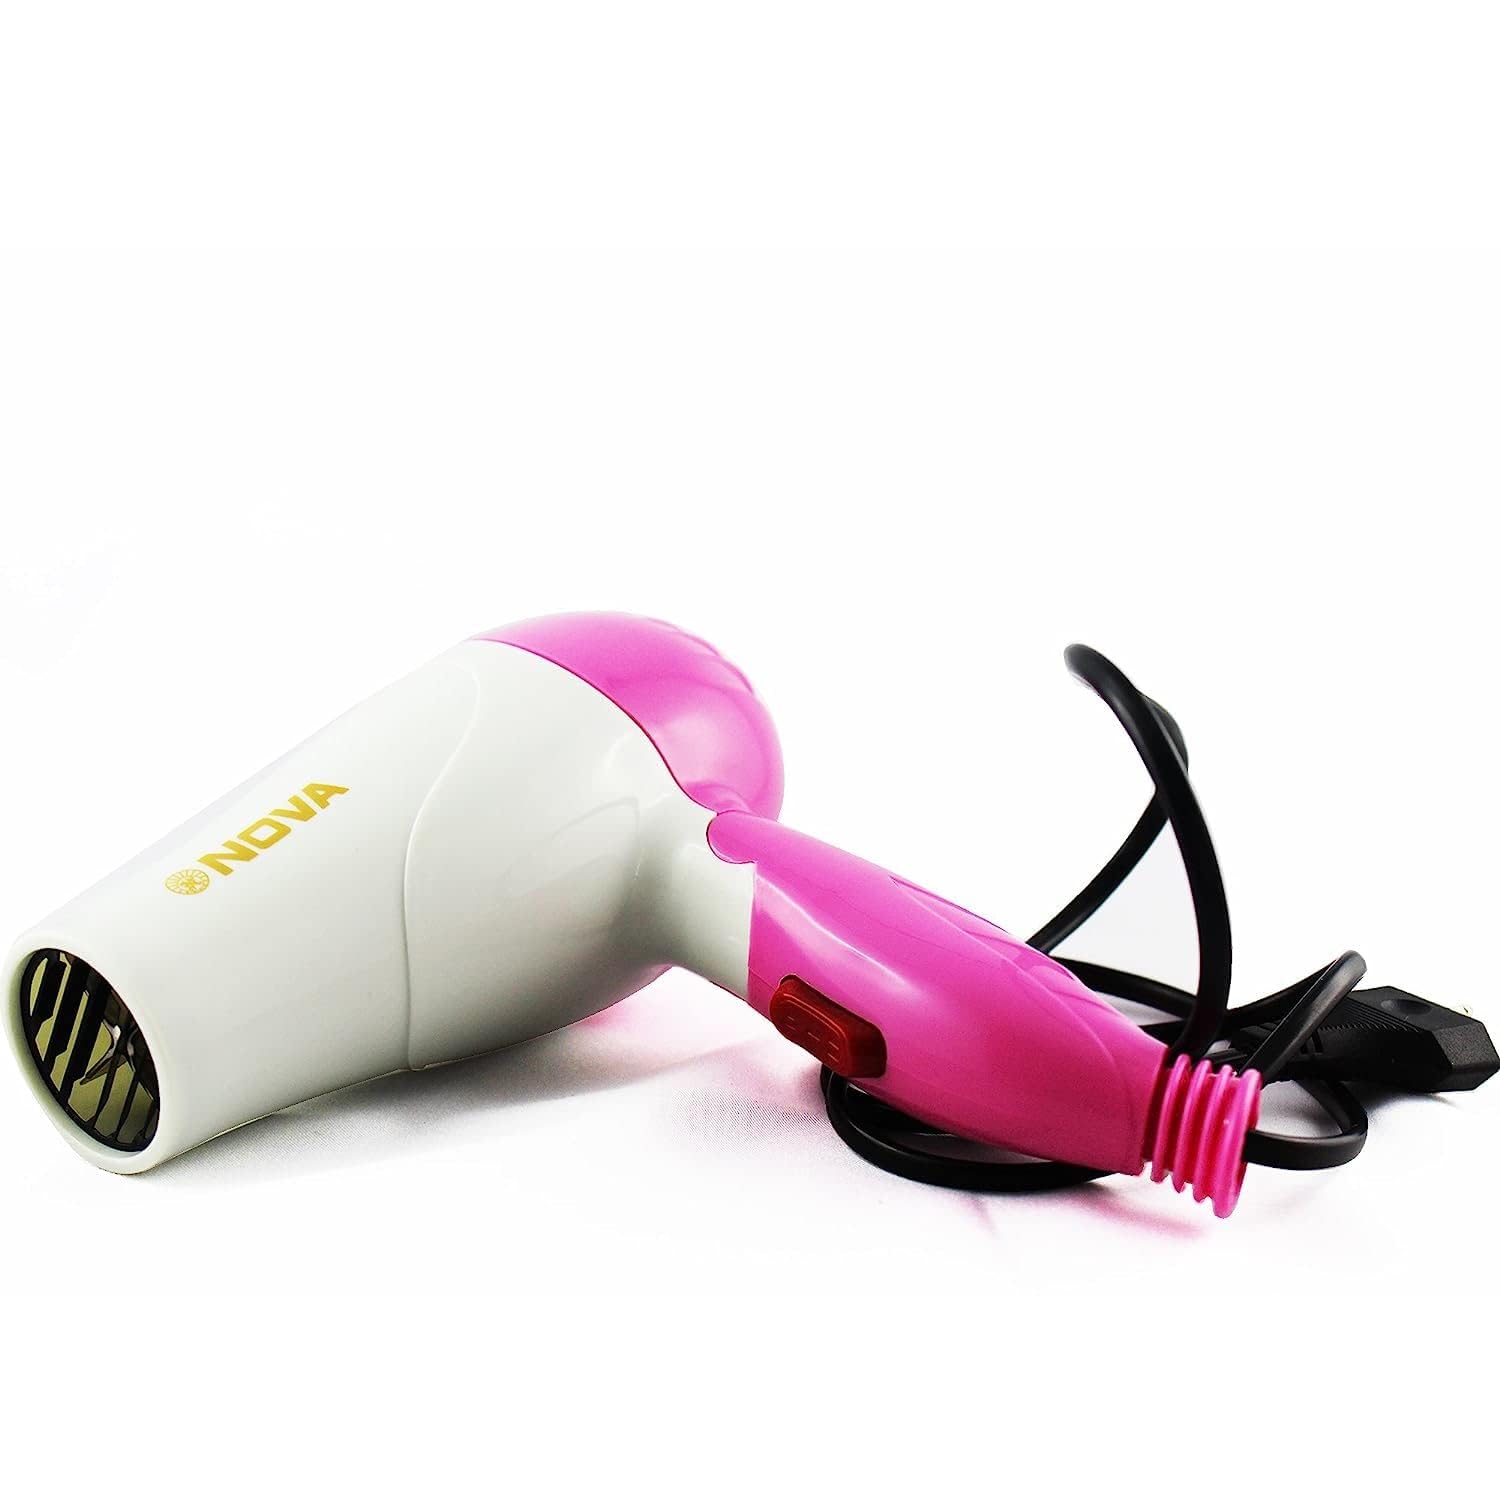 -Foldable-Hair-Dryer-Professional-Electric-Foldable-Hair-Dryer-With-2-Speed-Control